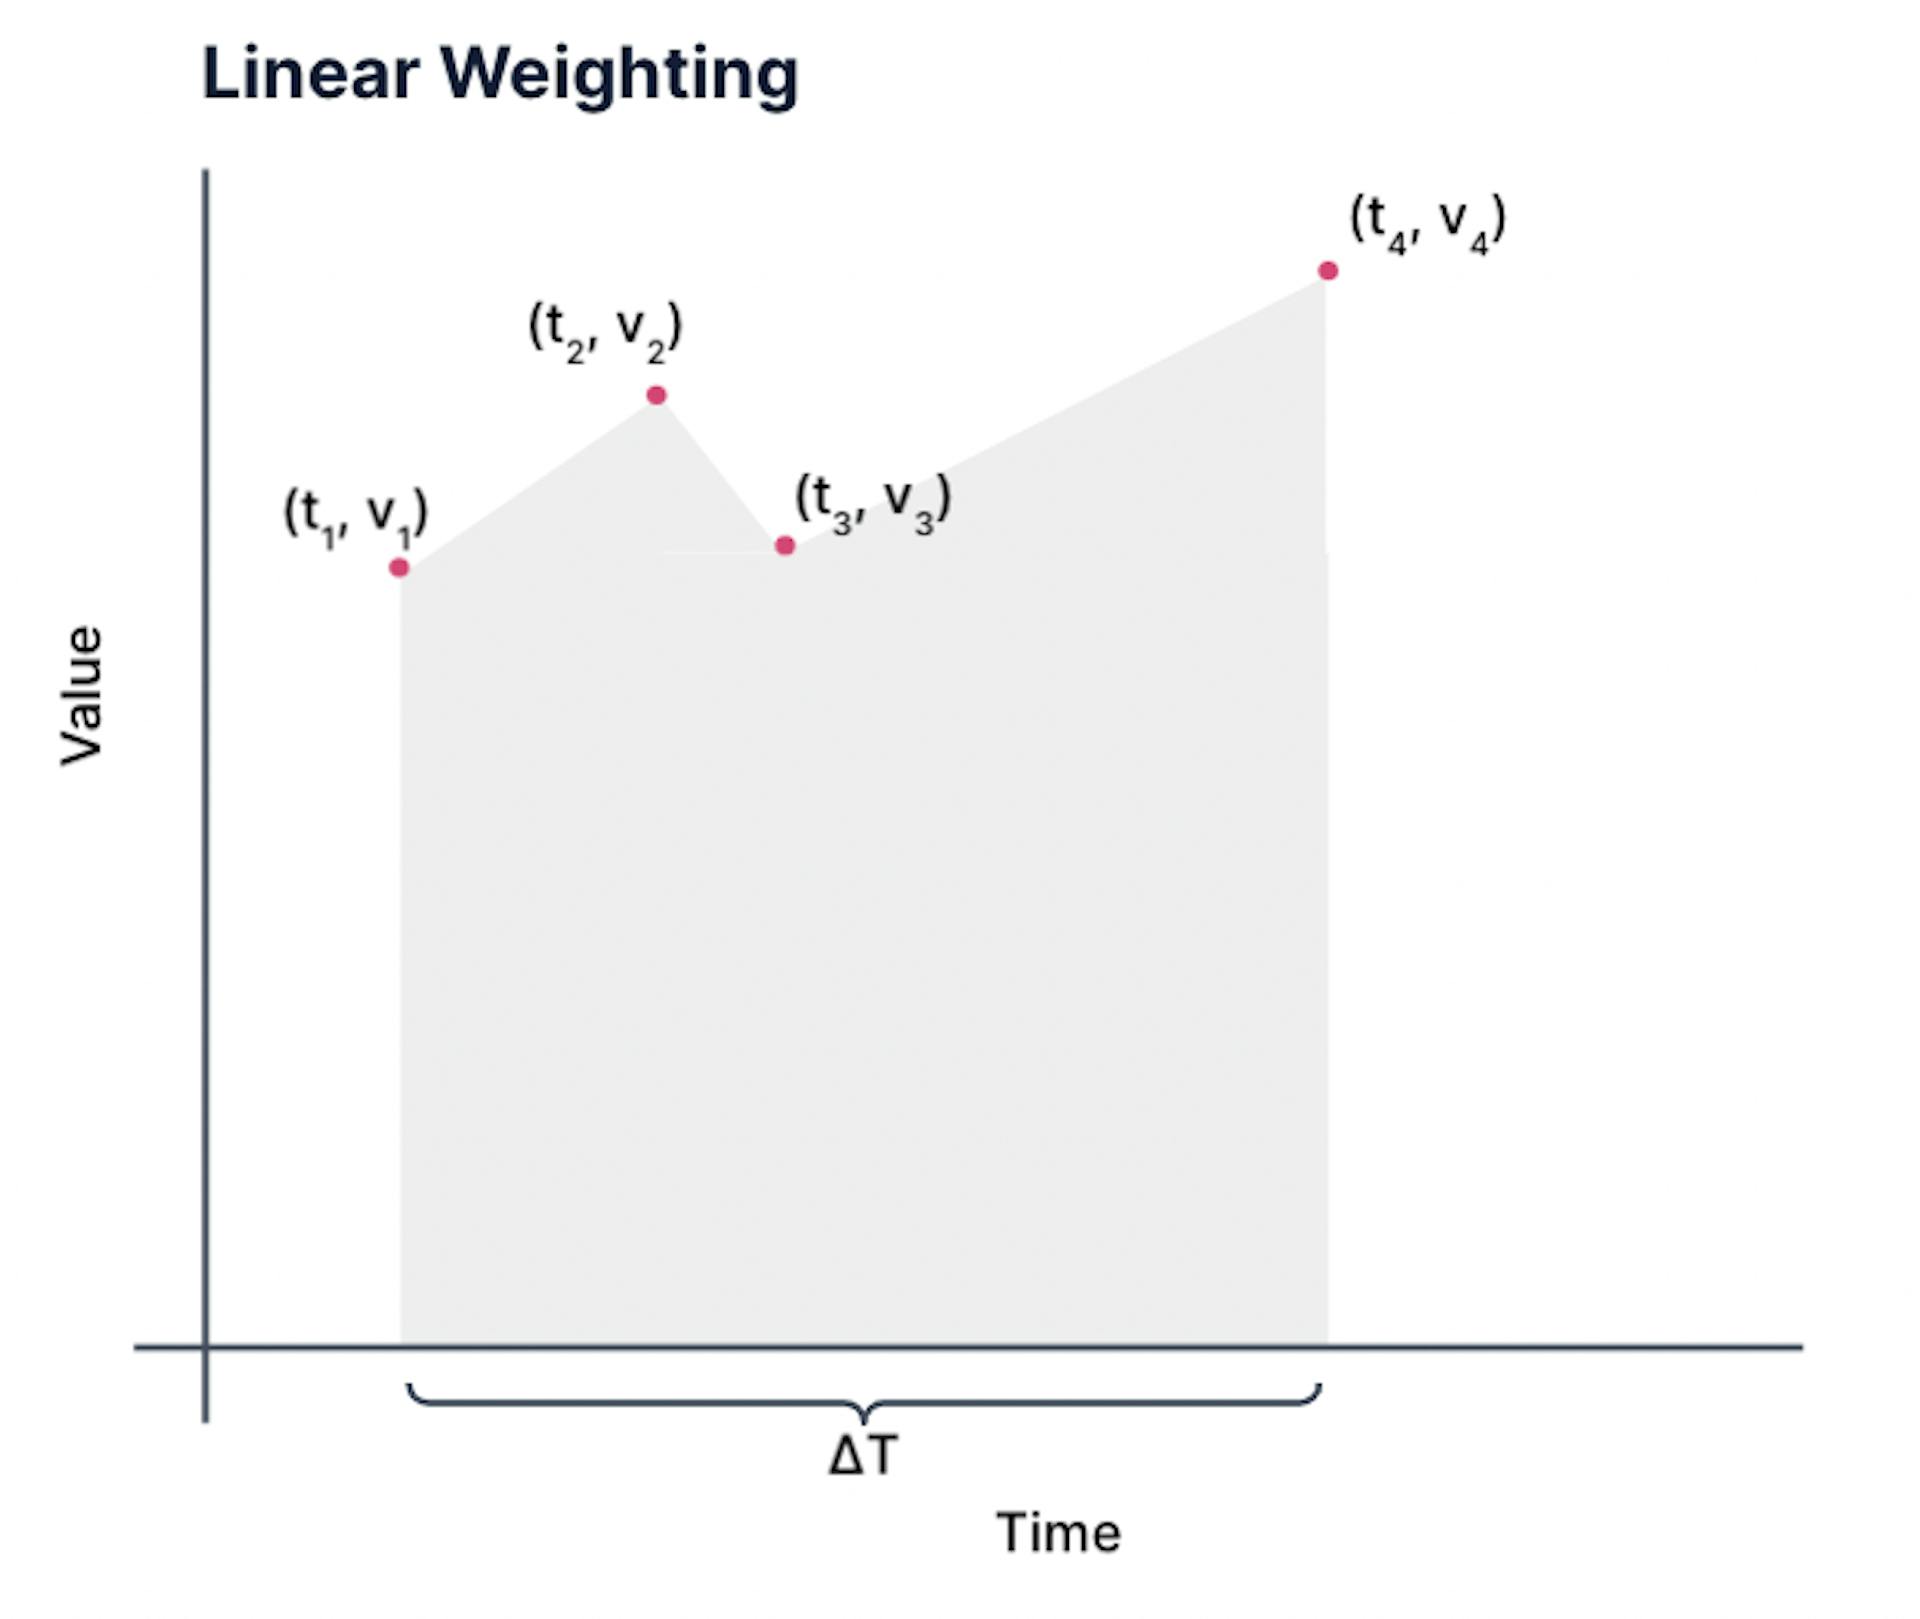 Linear weighting is useful when you are sampling a changing value at irregular intervals.